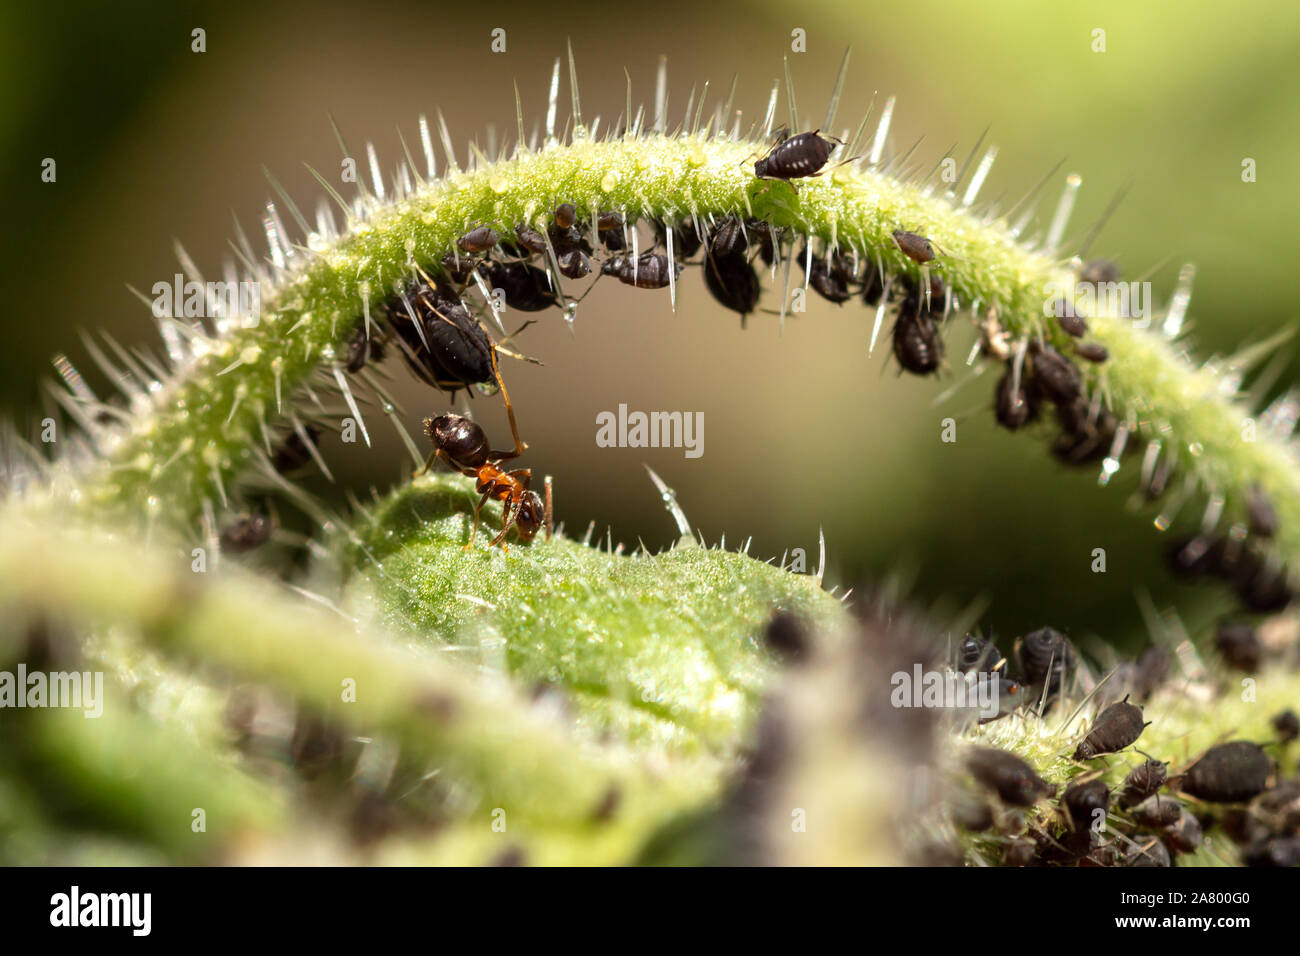 Aphids and ants on a green plant, symbiosis and cohabit wildlife of insects, closeup Stock Photo